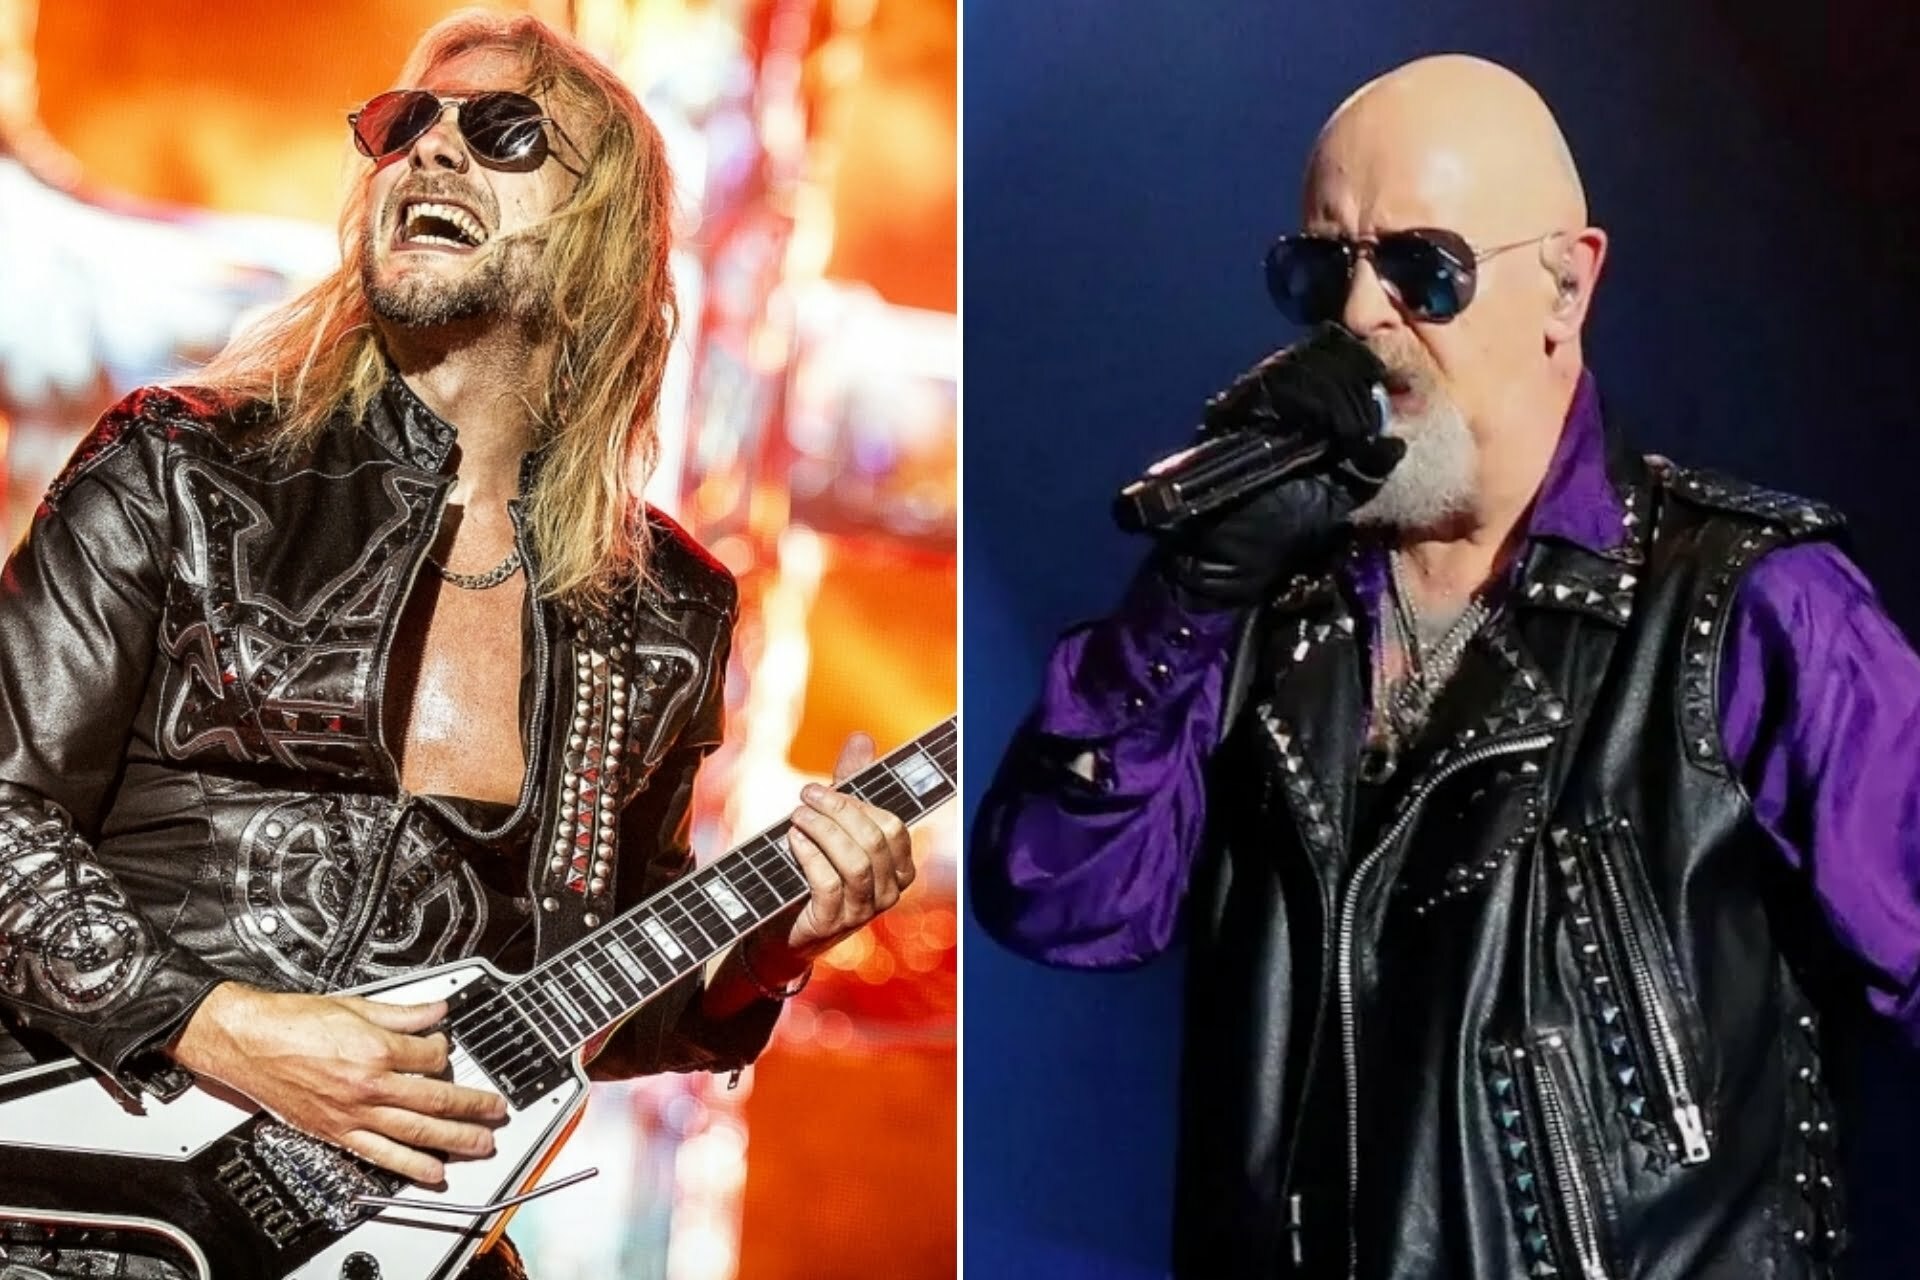 Rob Halford On Richie Faulkner: "He's A Miracle Man"